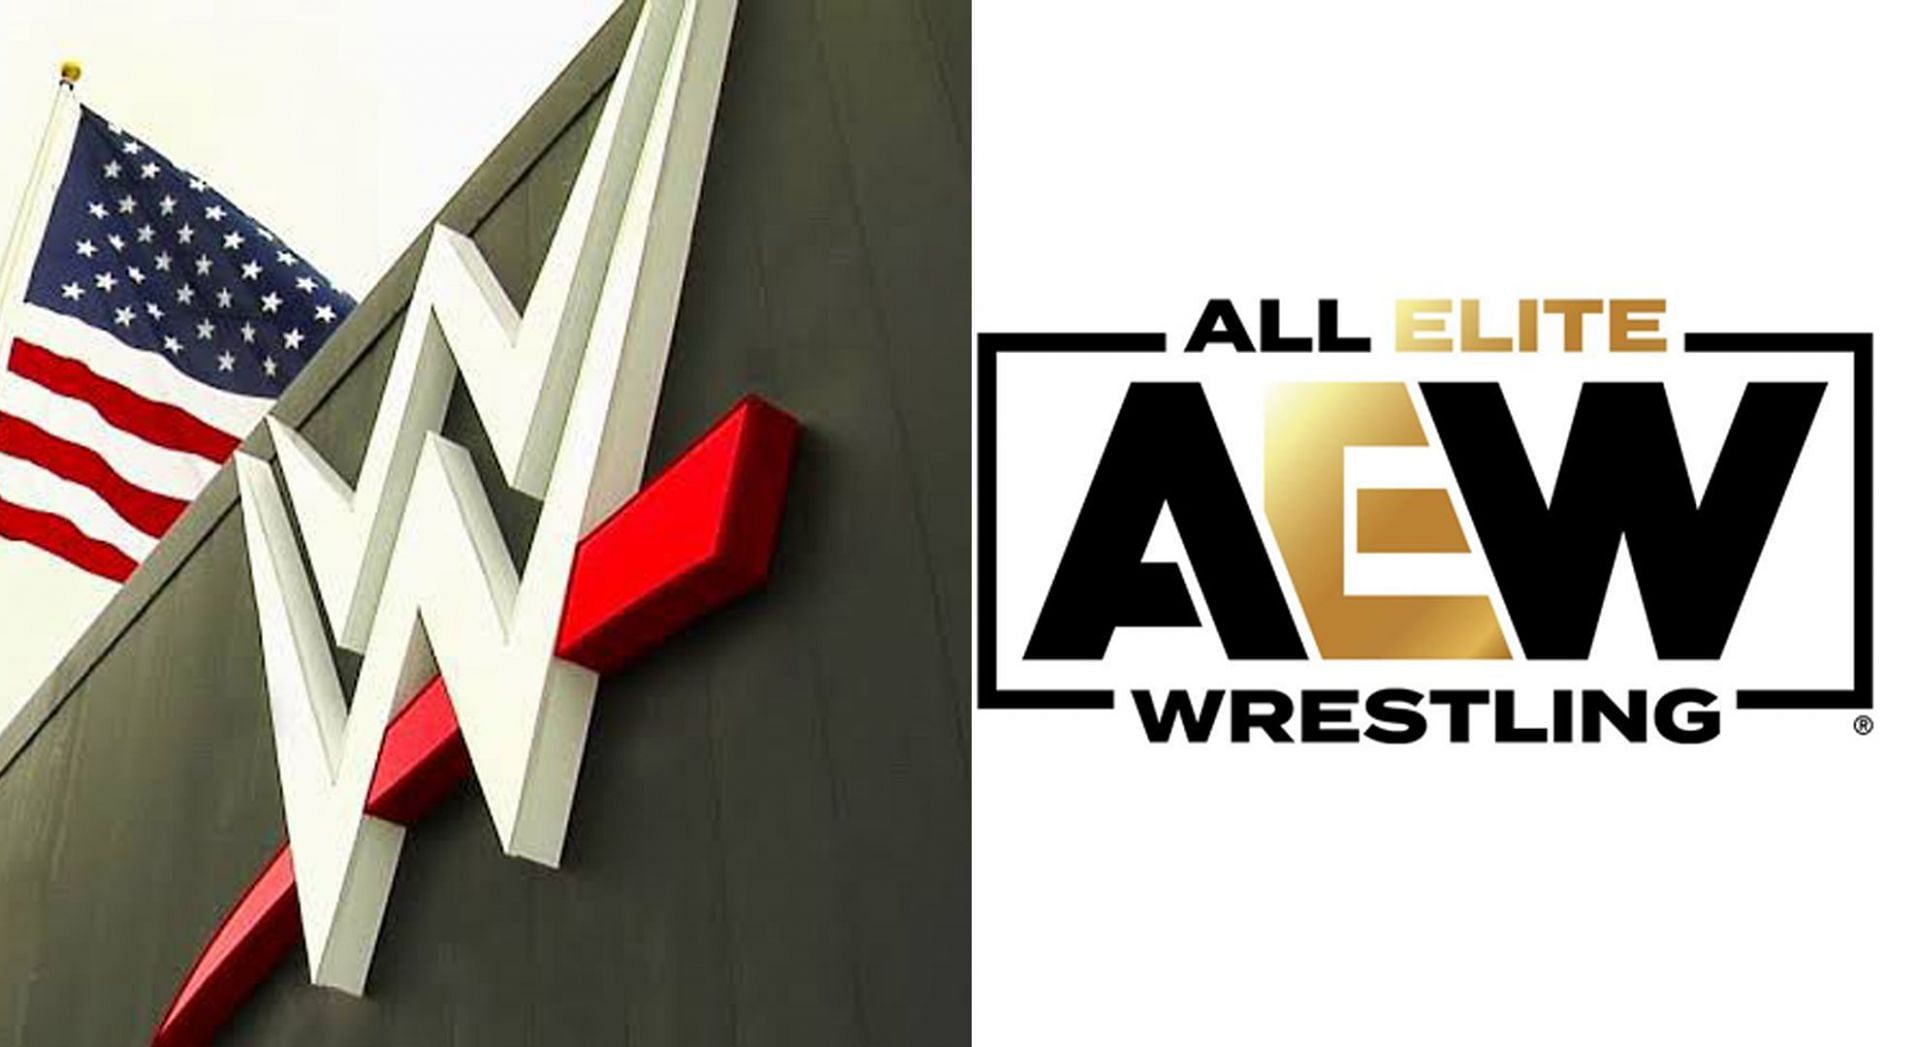 Many WWE legends have become a part of AEW in recent years